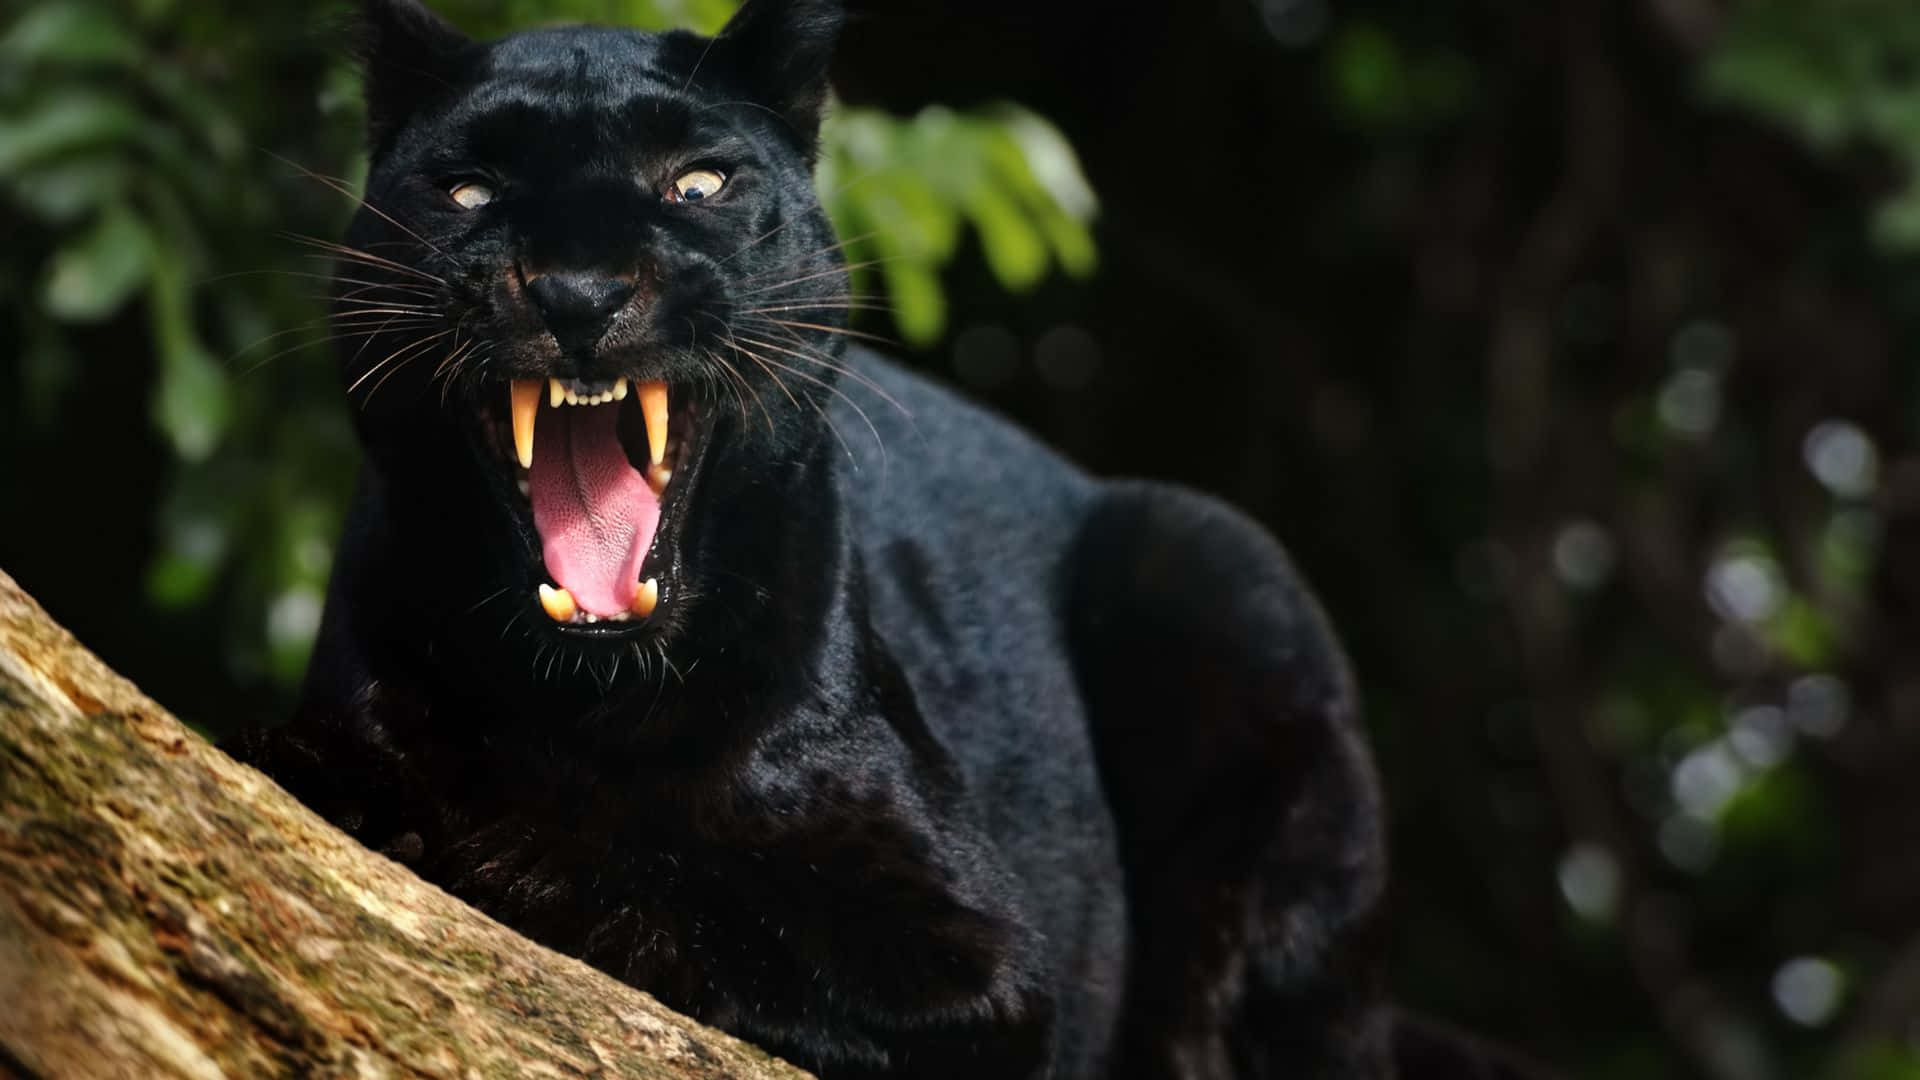 Majestic Black Panther on the Prowl